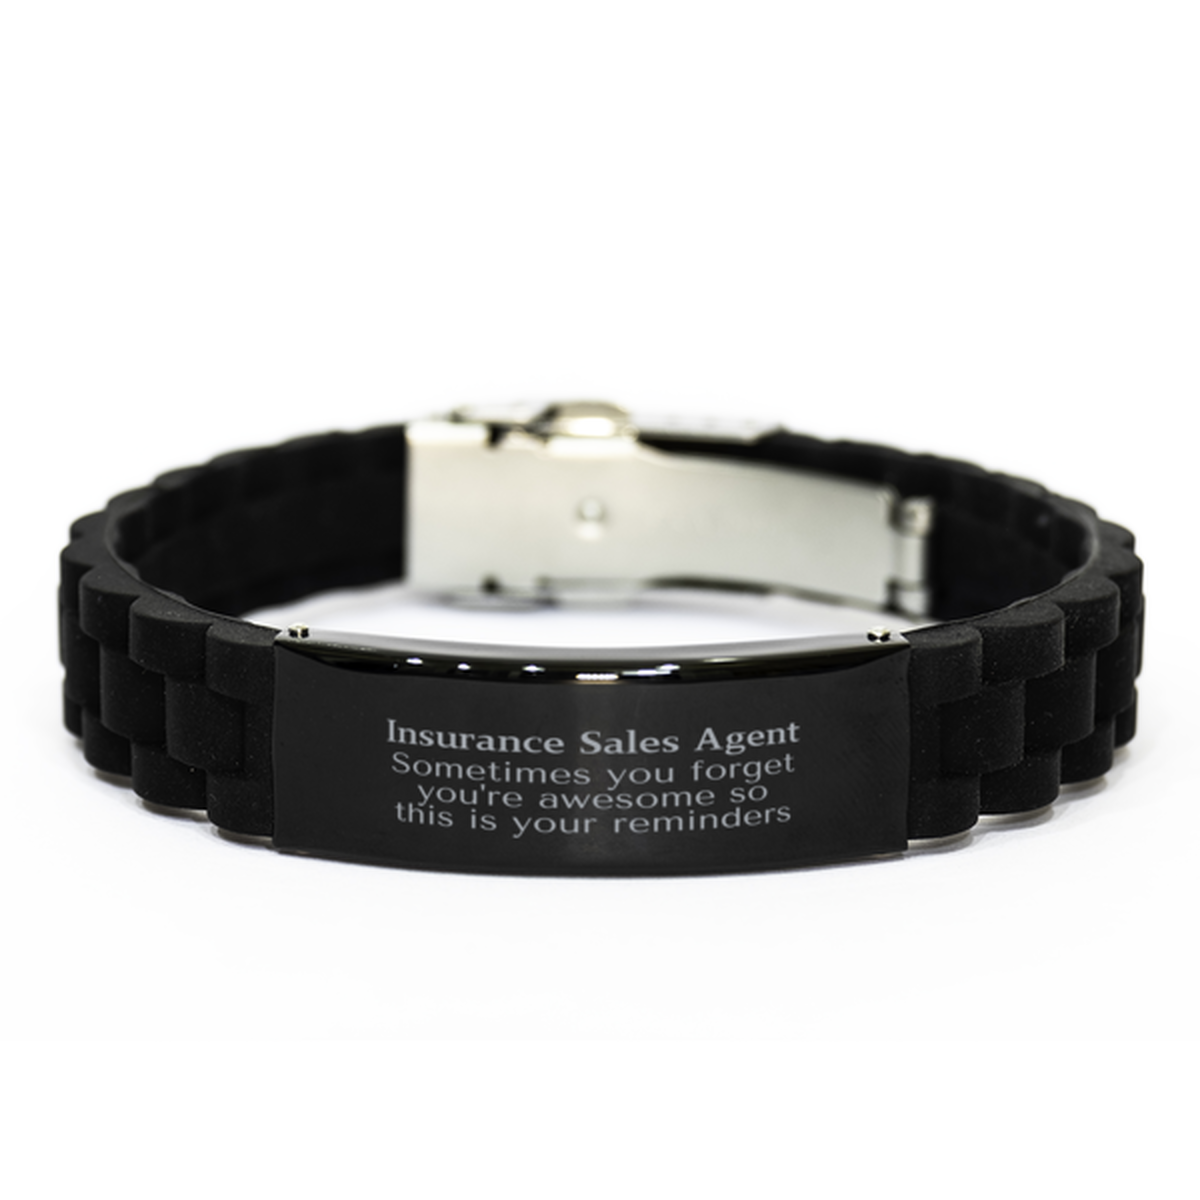 Sentimental Insurance Sales Agent Black Glidelock Clasp Bracelet, Insurance Sales Agent Sometimes you forget you're awesome so this is your reminders, Graduation Christmas Birthday Gifts for Insurance Sales Agent, Men, Women, Coworkers